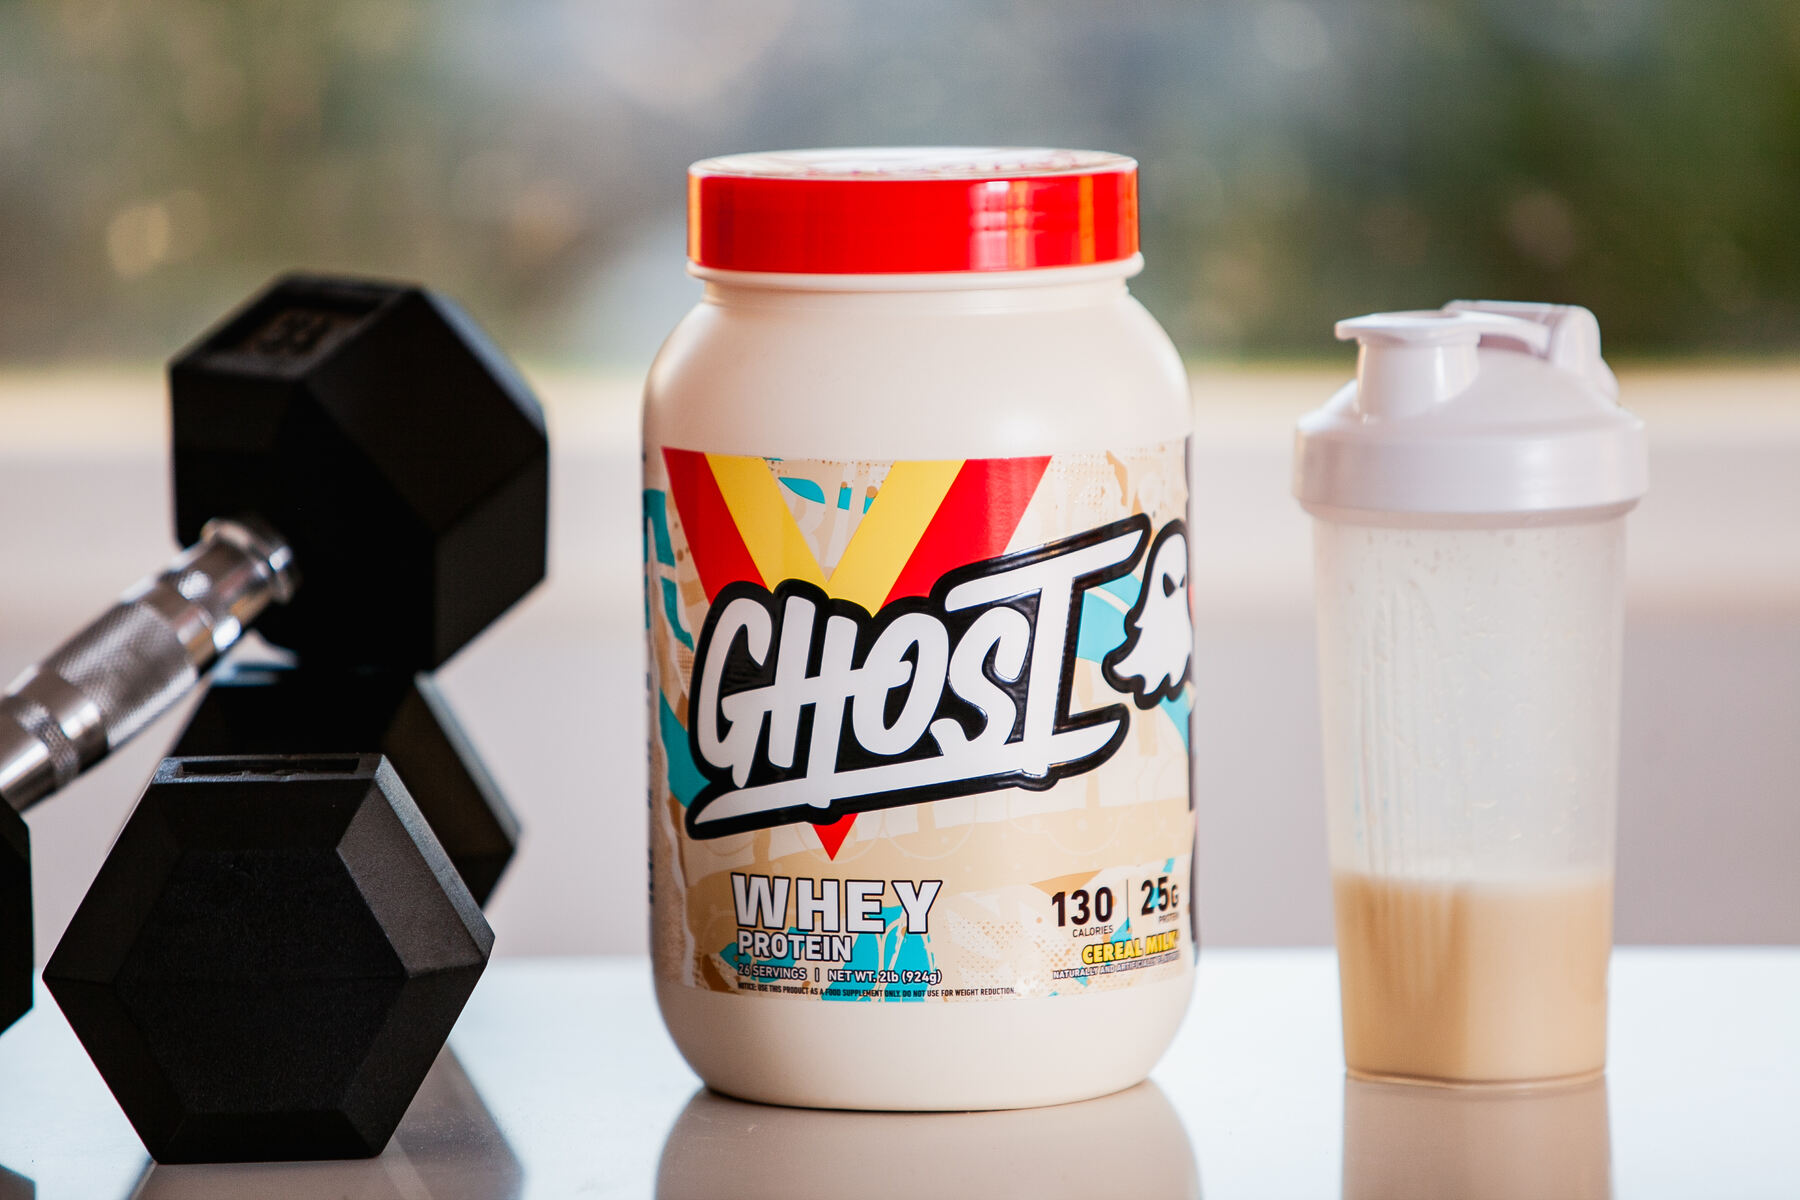 A container of Ghost Whey Protein with a colorful label next to a black dumbbell and a white protein shaker filled with a beige liquid, set against a blurred natural backdrop